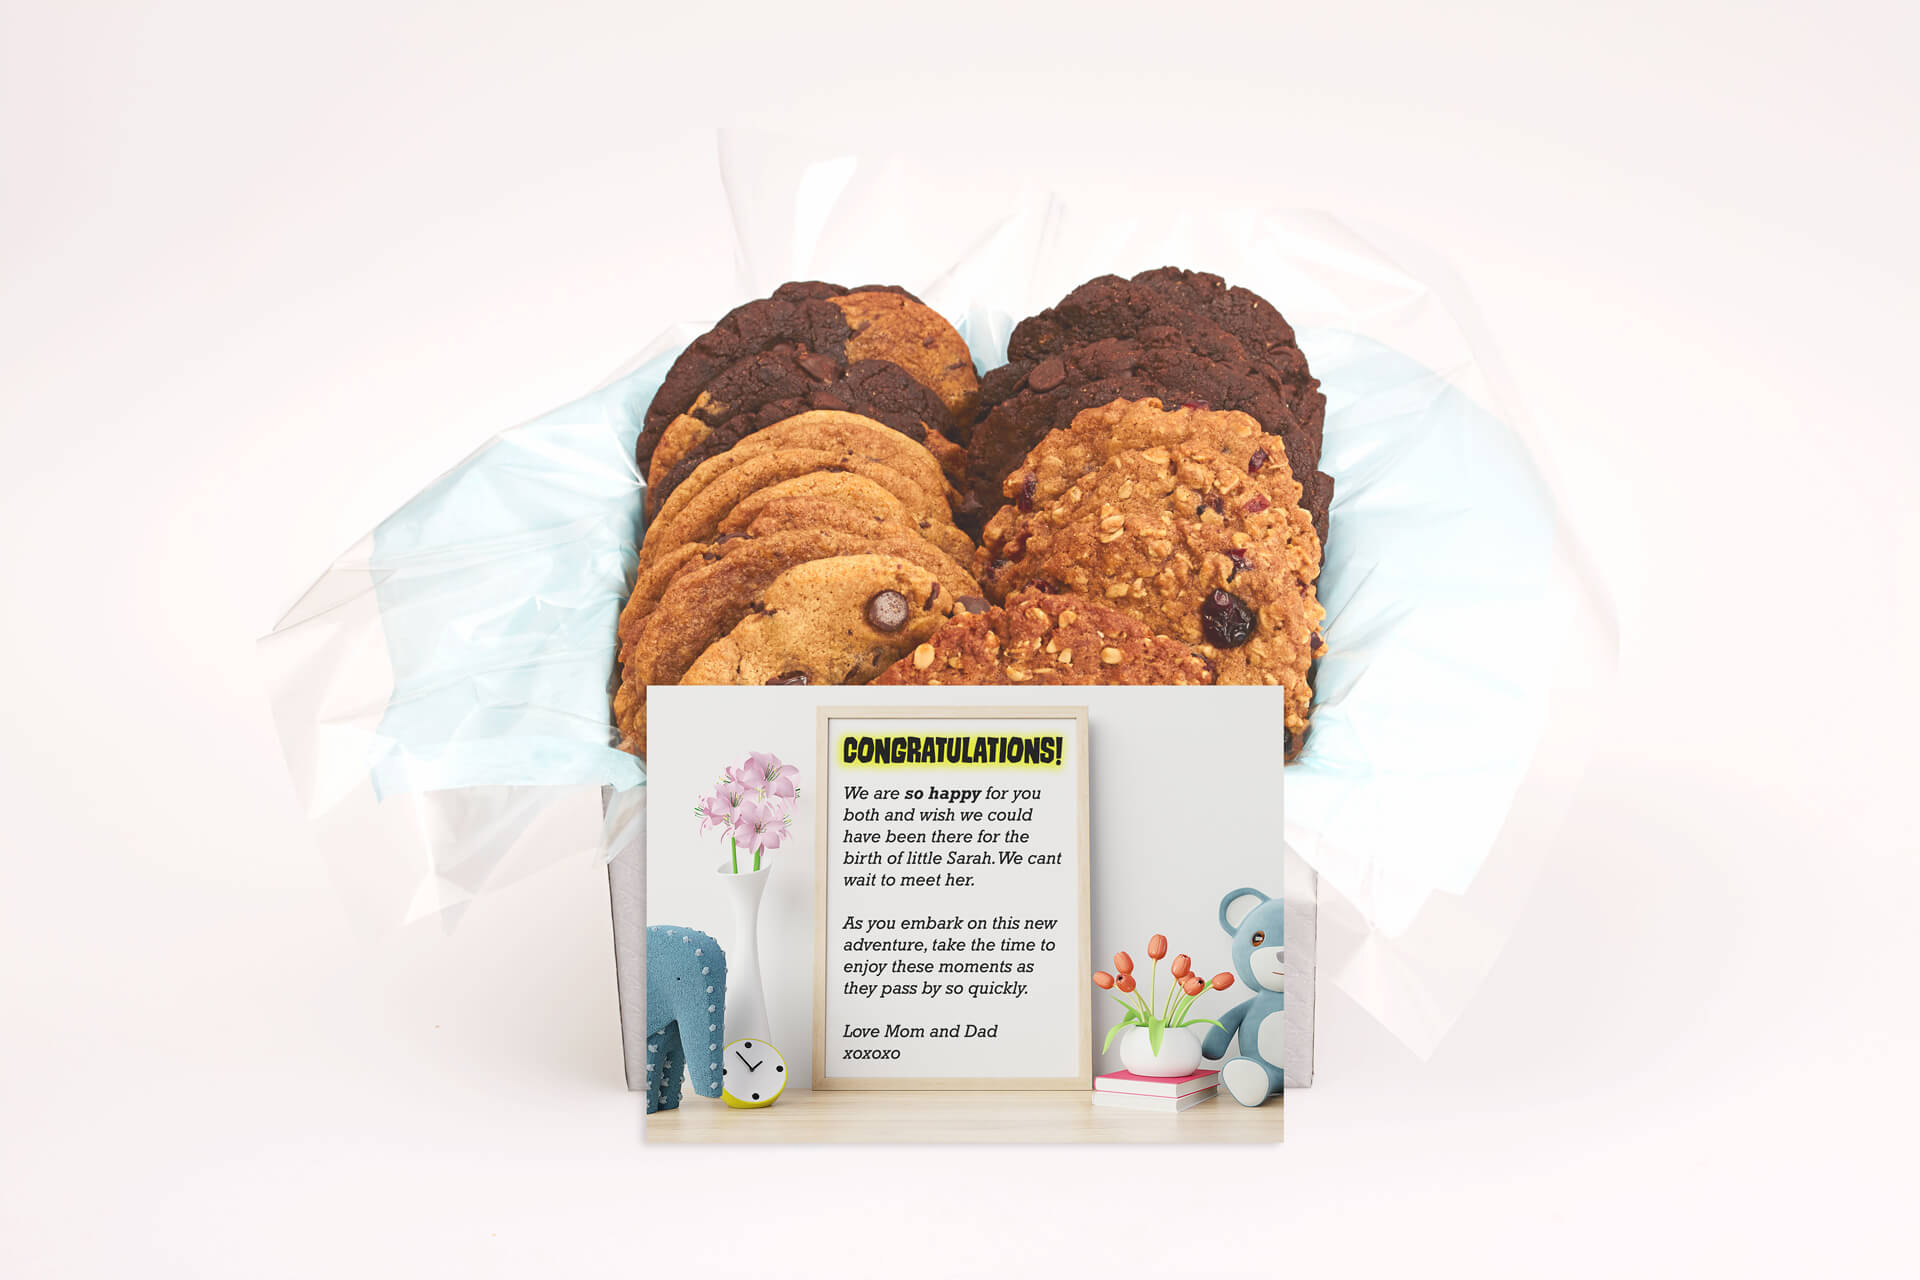 Cookie Gift Image